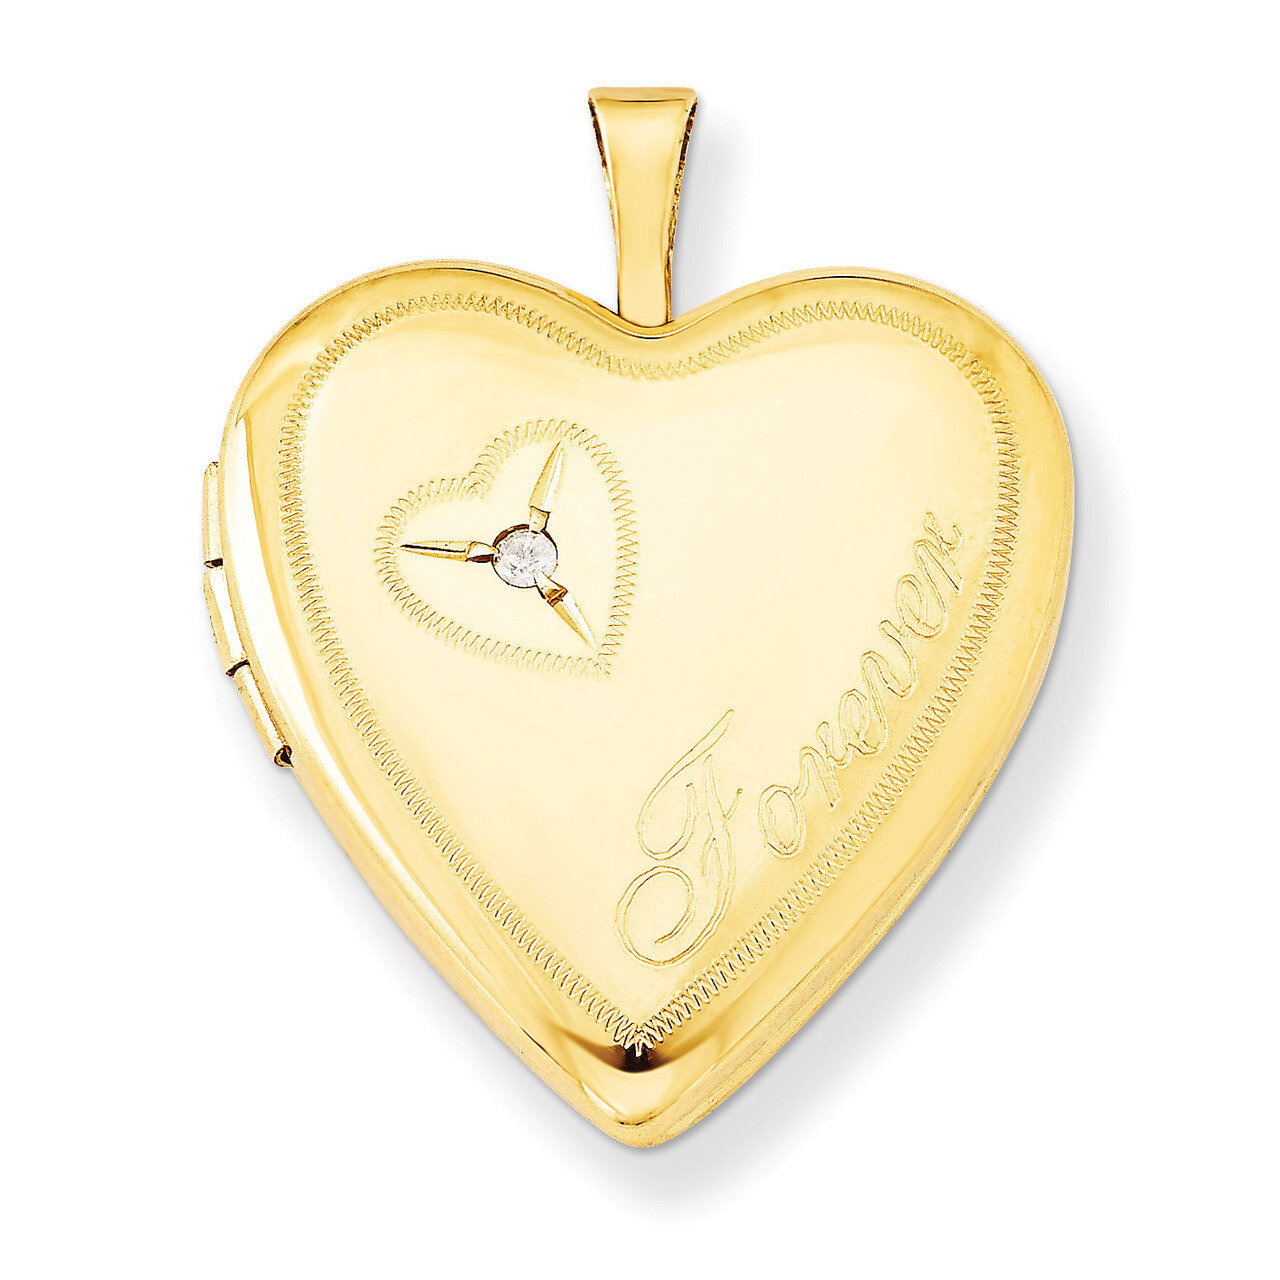 Diamond in Heart Forever Heart Locket Sterling Silver Gold Filled 20mm QLS285-18